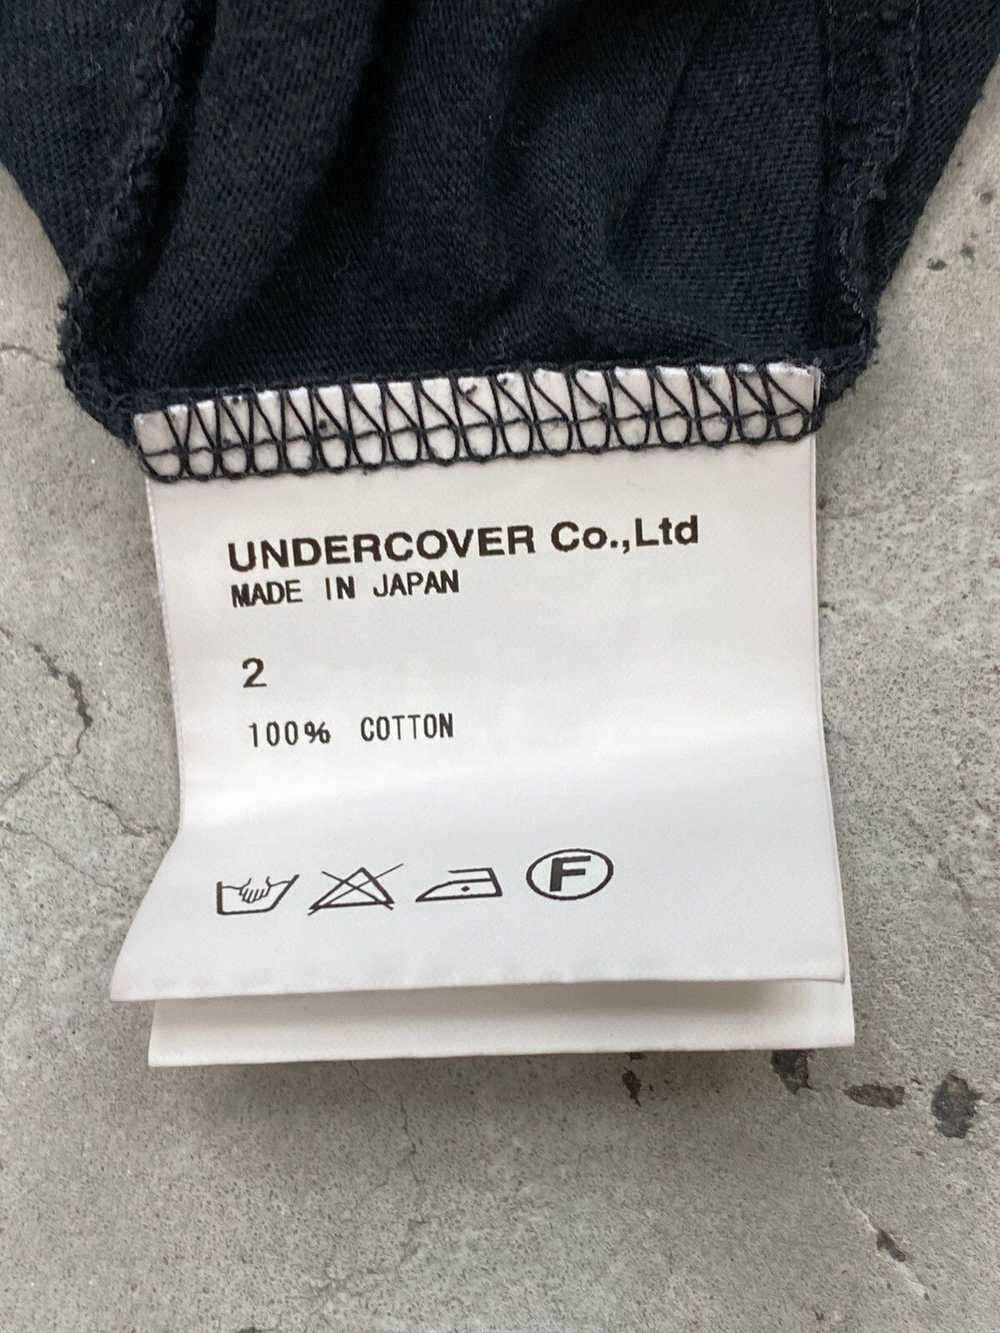 Undercover Undercover Anarchy “A” Tee - image 4